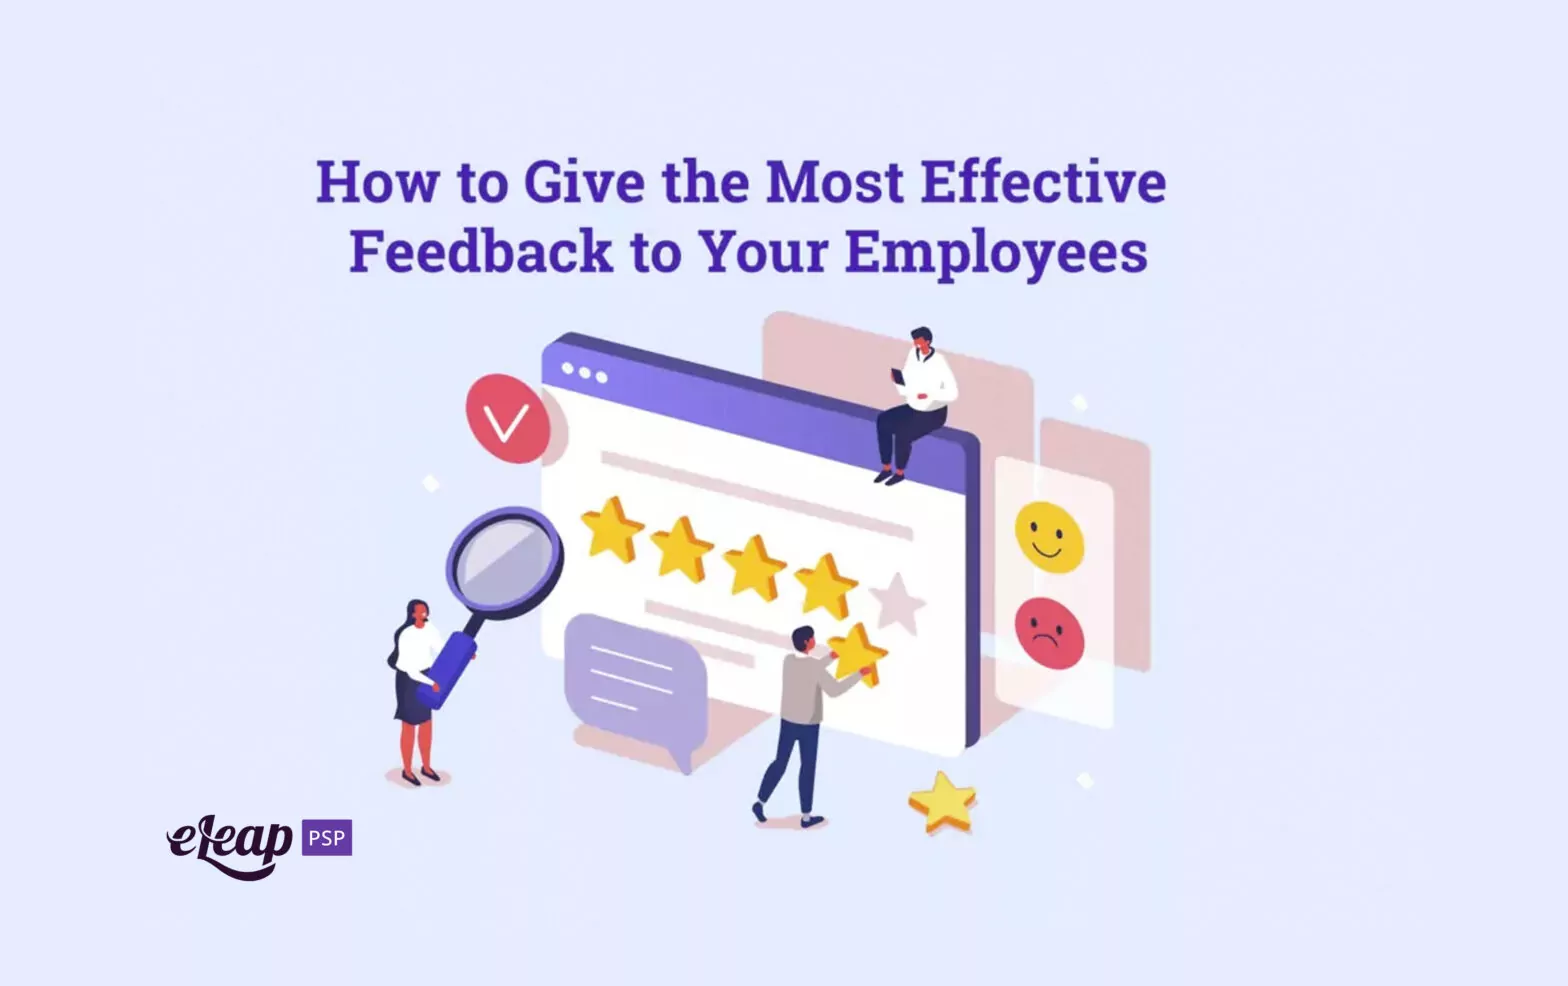 How to Give the Most Effective Feedback to Your Employees